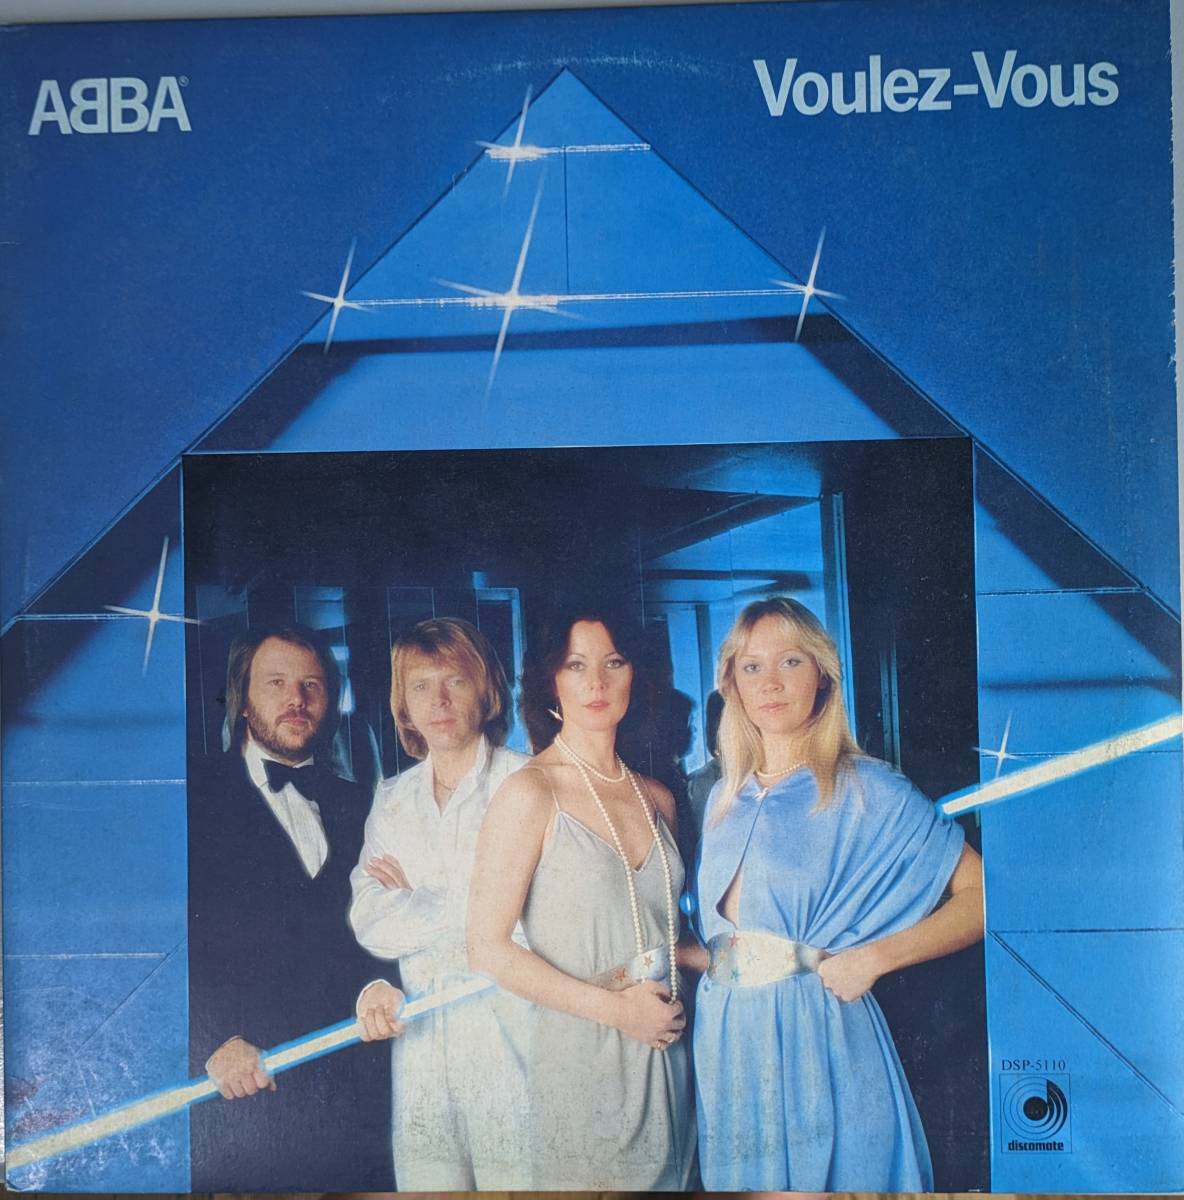  beautiful record abaLP record [Voules-Vous]